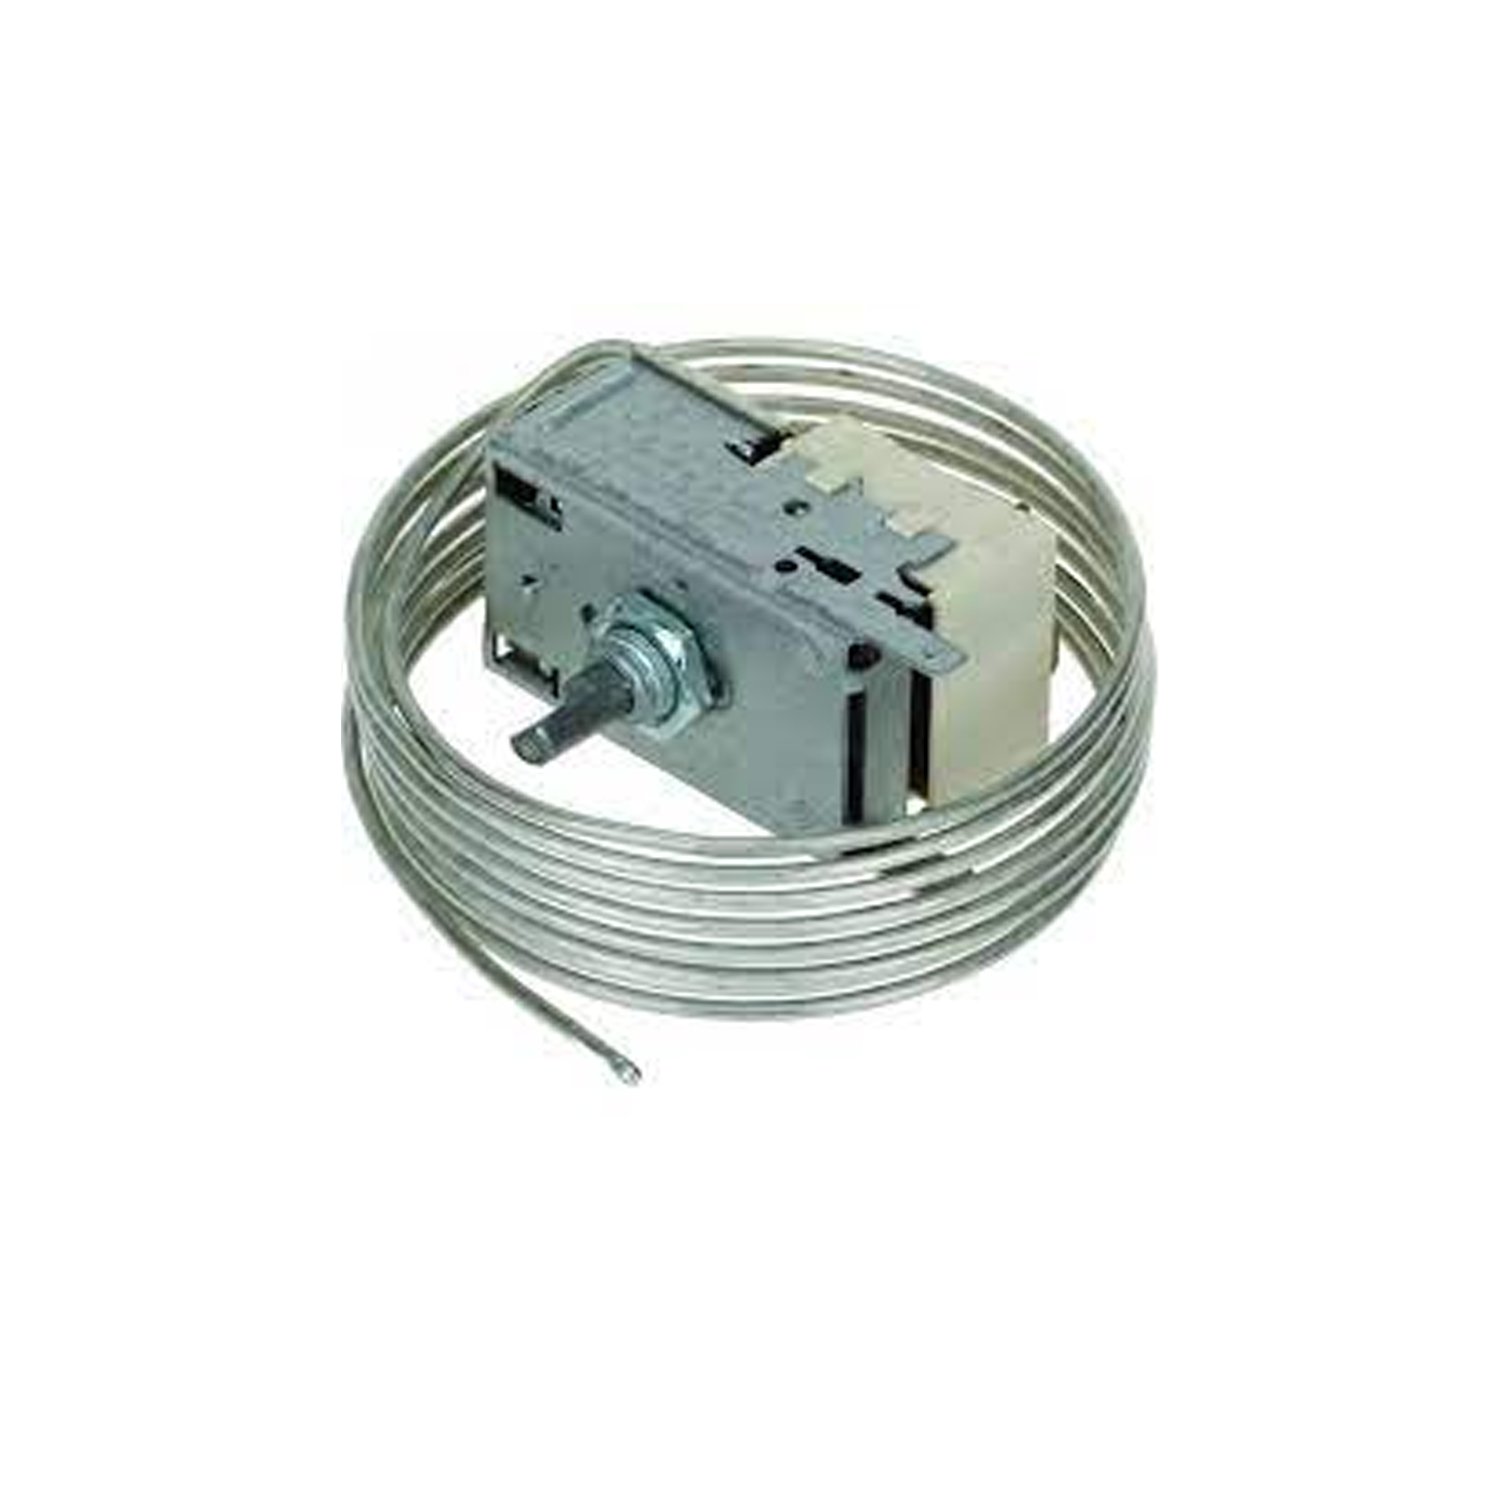 THERMOSTAT RANCO K55-L5078,2 contacts 6A 250V capillary tube 2000 mm cold +1.4°C, warm +5.4°C crescent-shaped shaft ø 6x4.6 mm